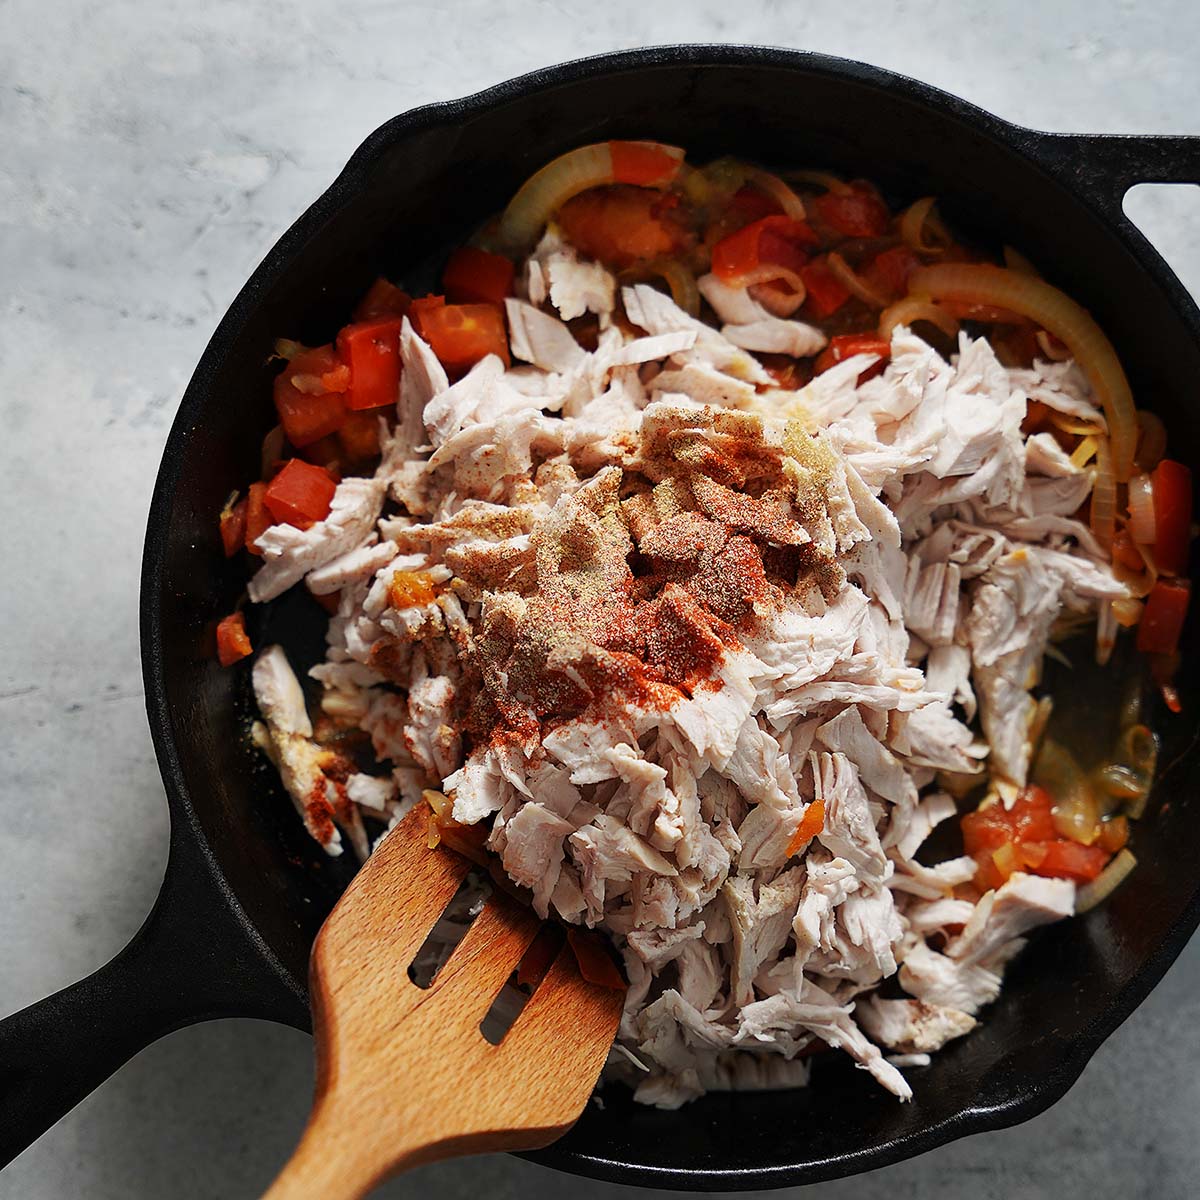 Sauteing shredded turkey with onions and tomatoes with spiced added on top.